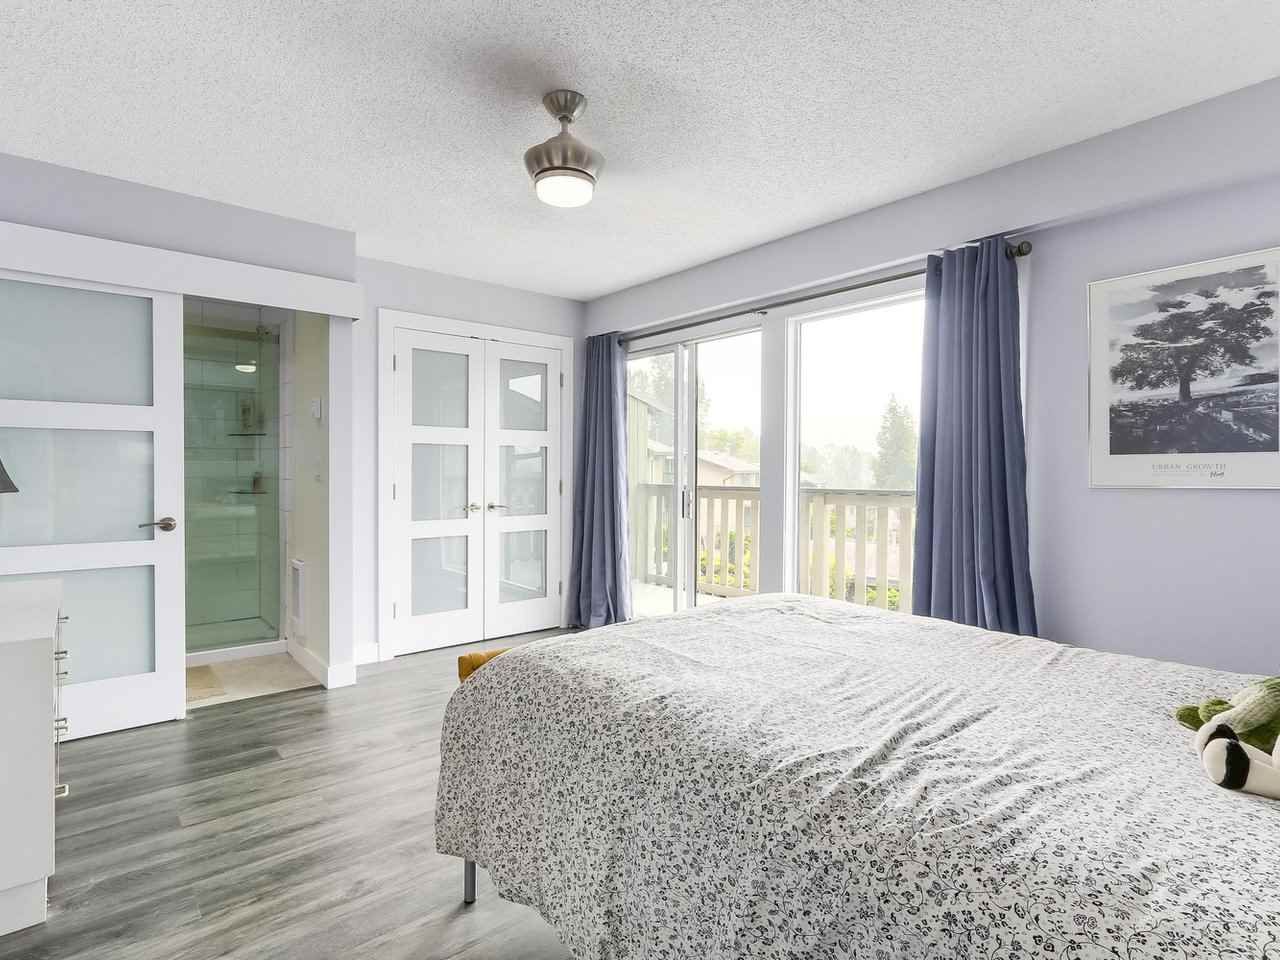 Photo 10: Photos: 1030 LILLOOET ROAD in North Vancouver: Lynnmour Townhouse for sale : MLS®# R2195623